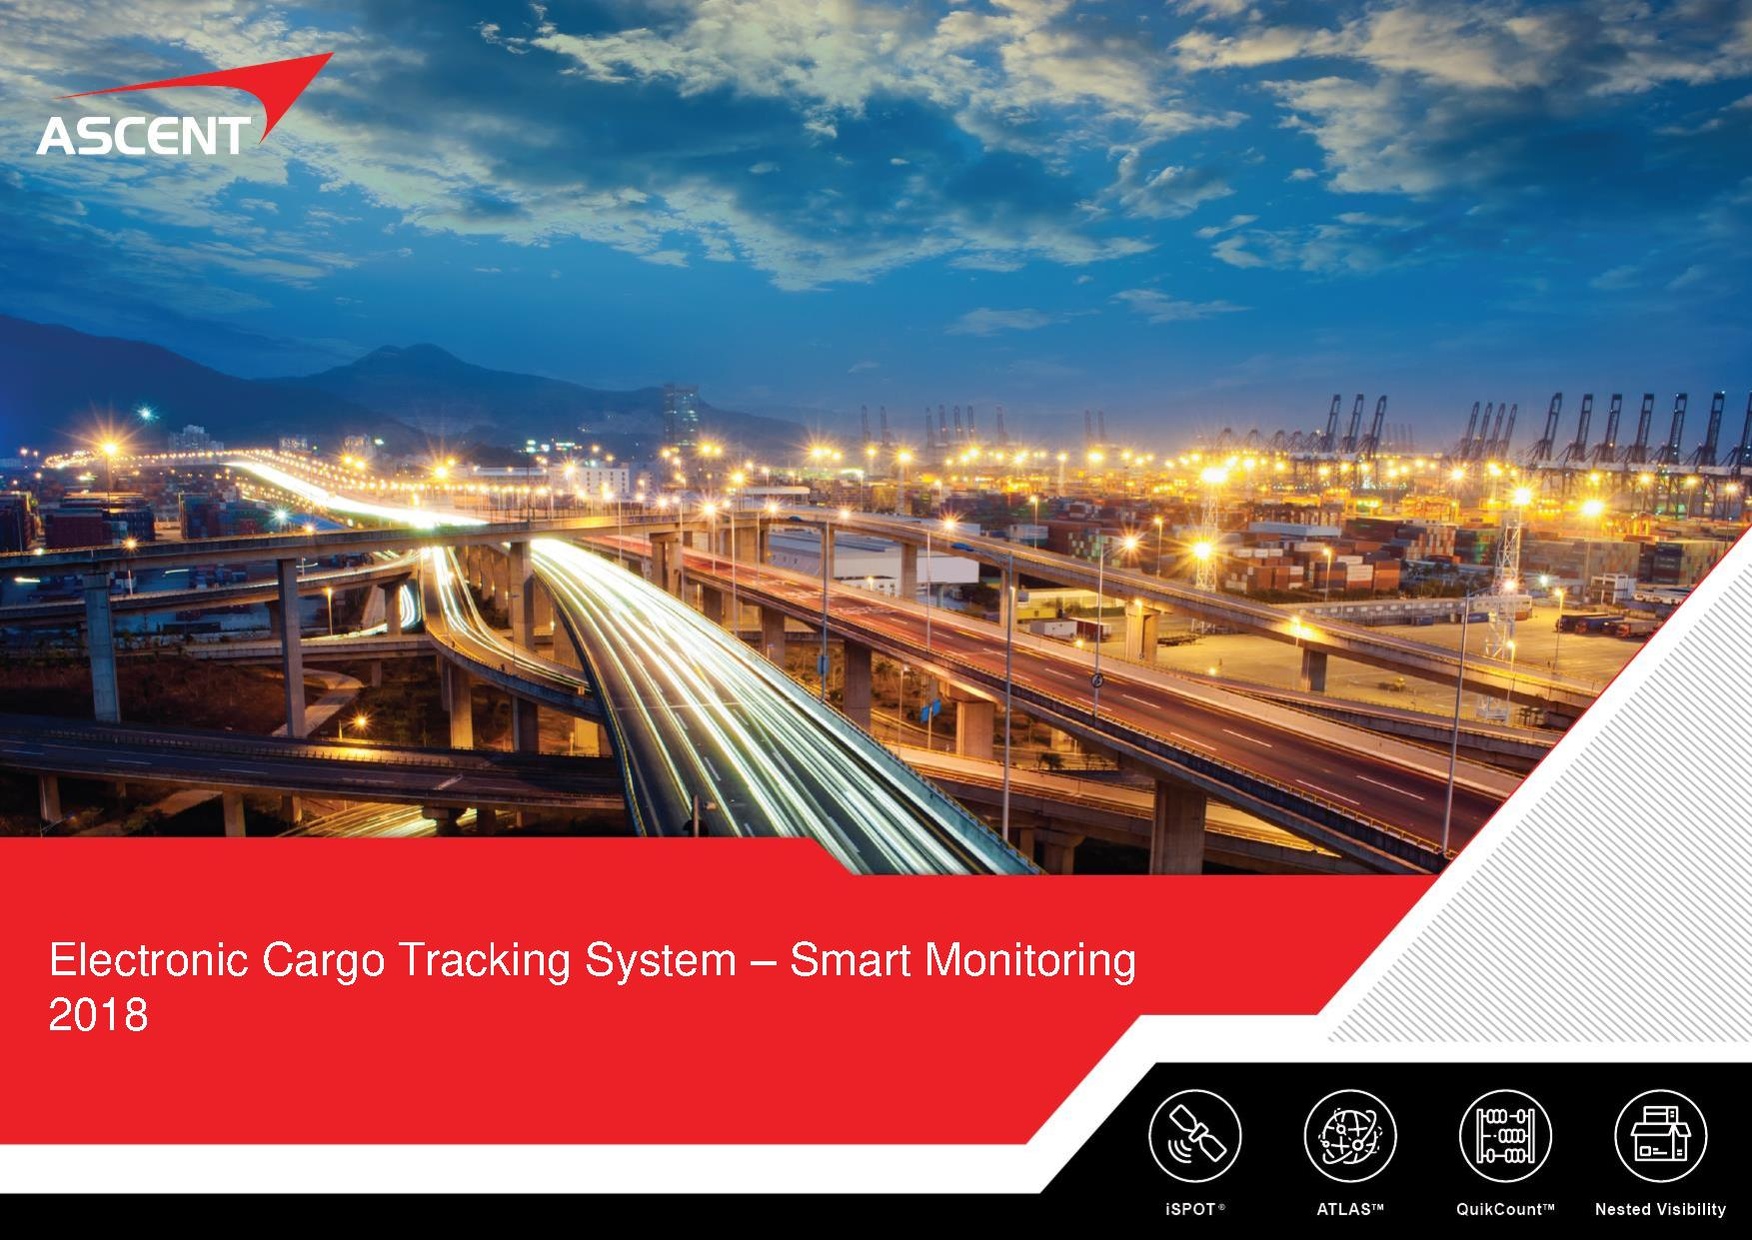 ISPOT Electronic Cargo Tracking System 2018 (s).pdf